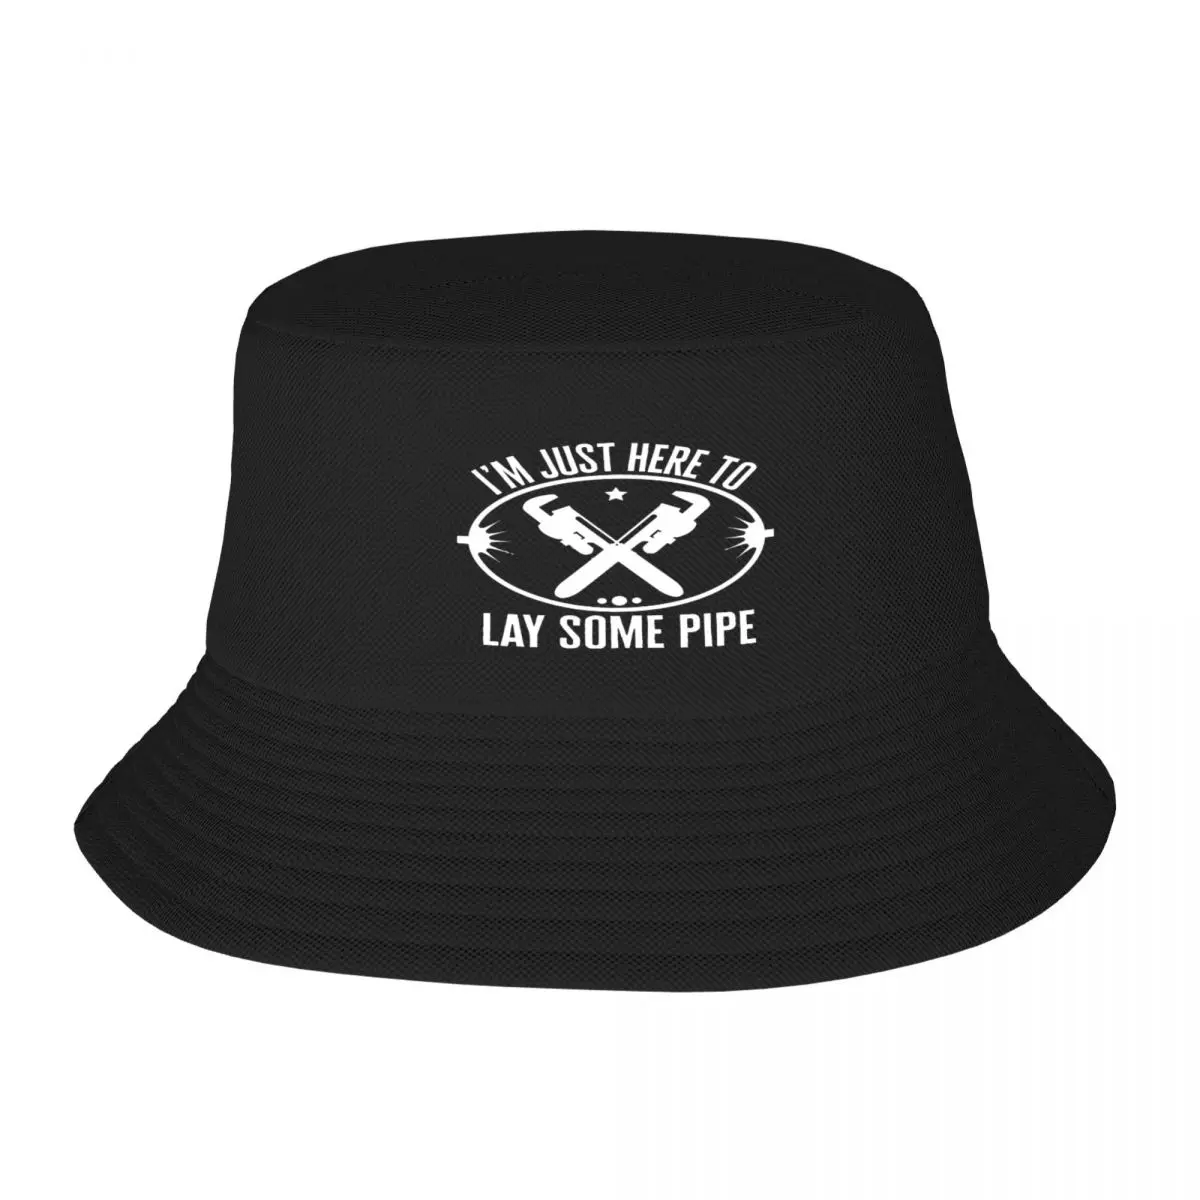 

I'm Just Here To Lay Some Pipe Funny Plumber Fisherman's Hat, Adult Cap Modern Light Sports Nice Gift